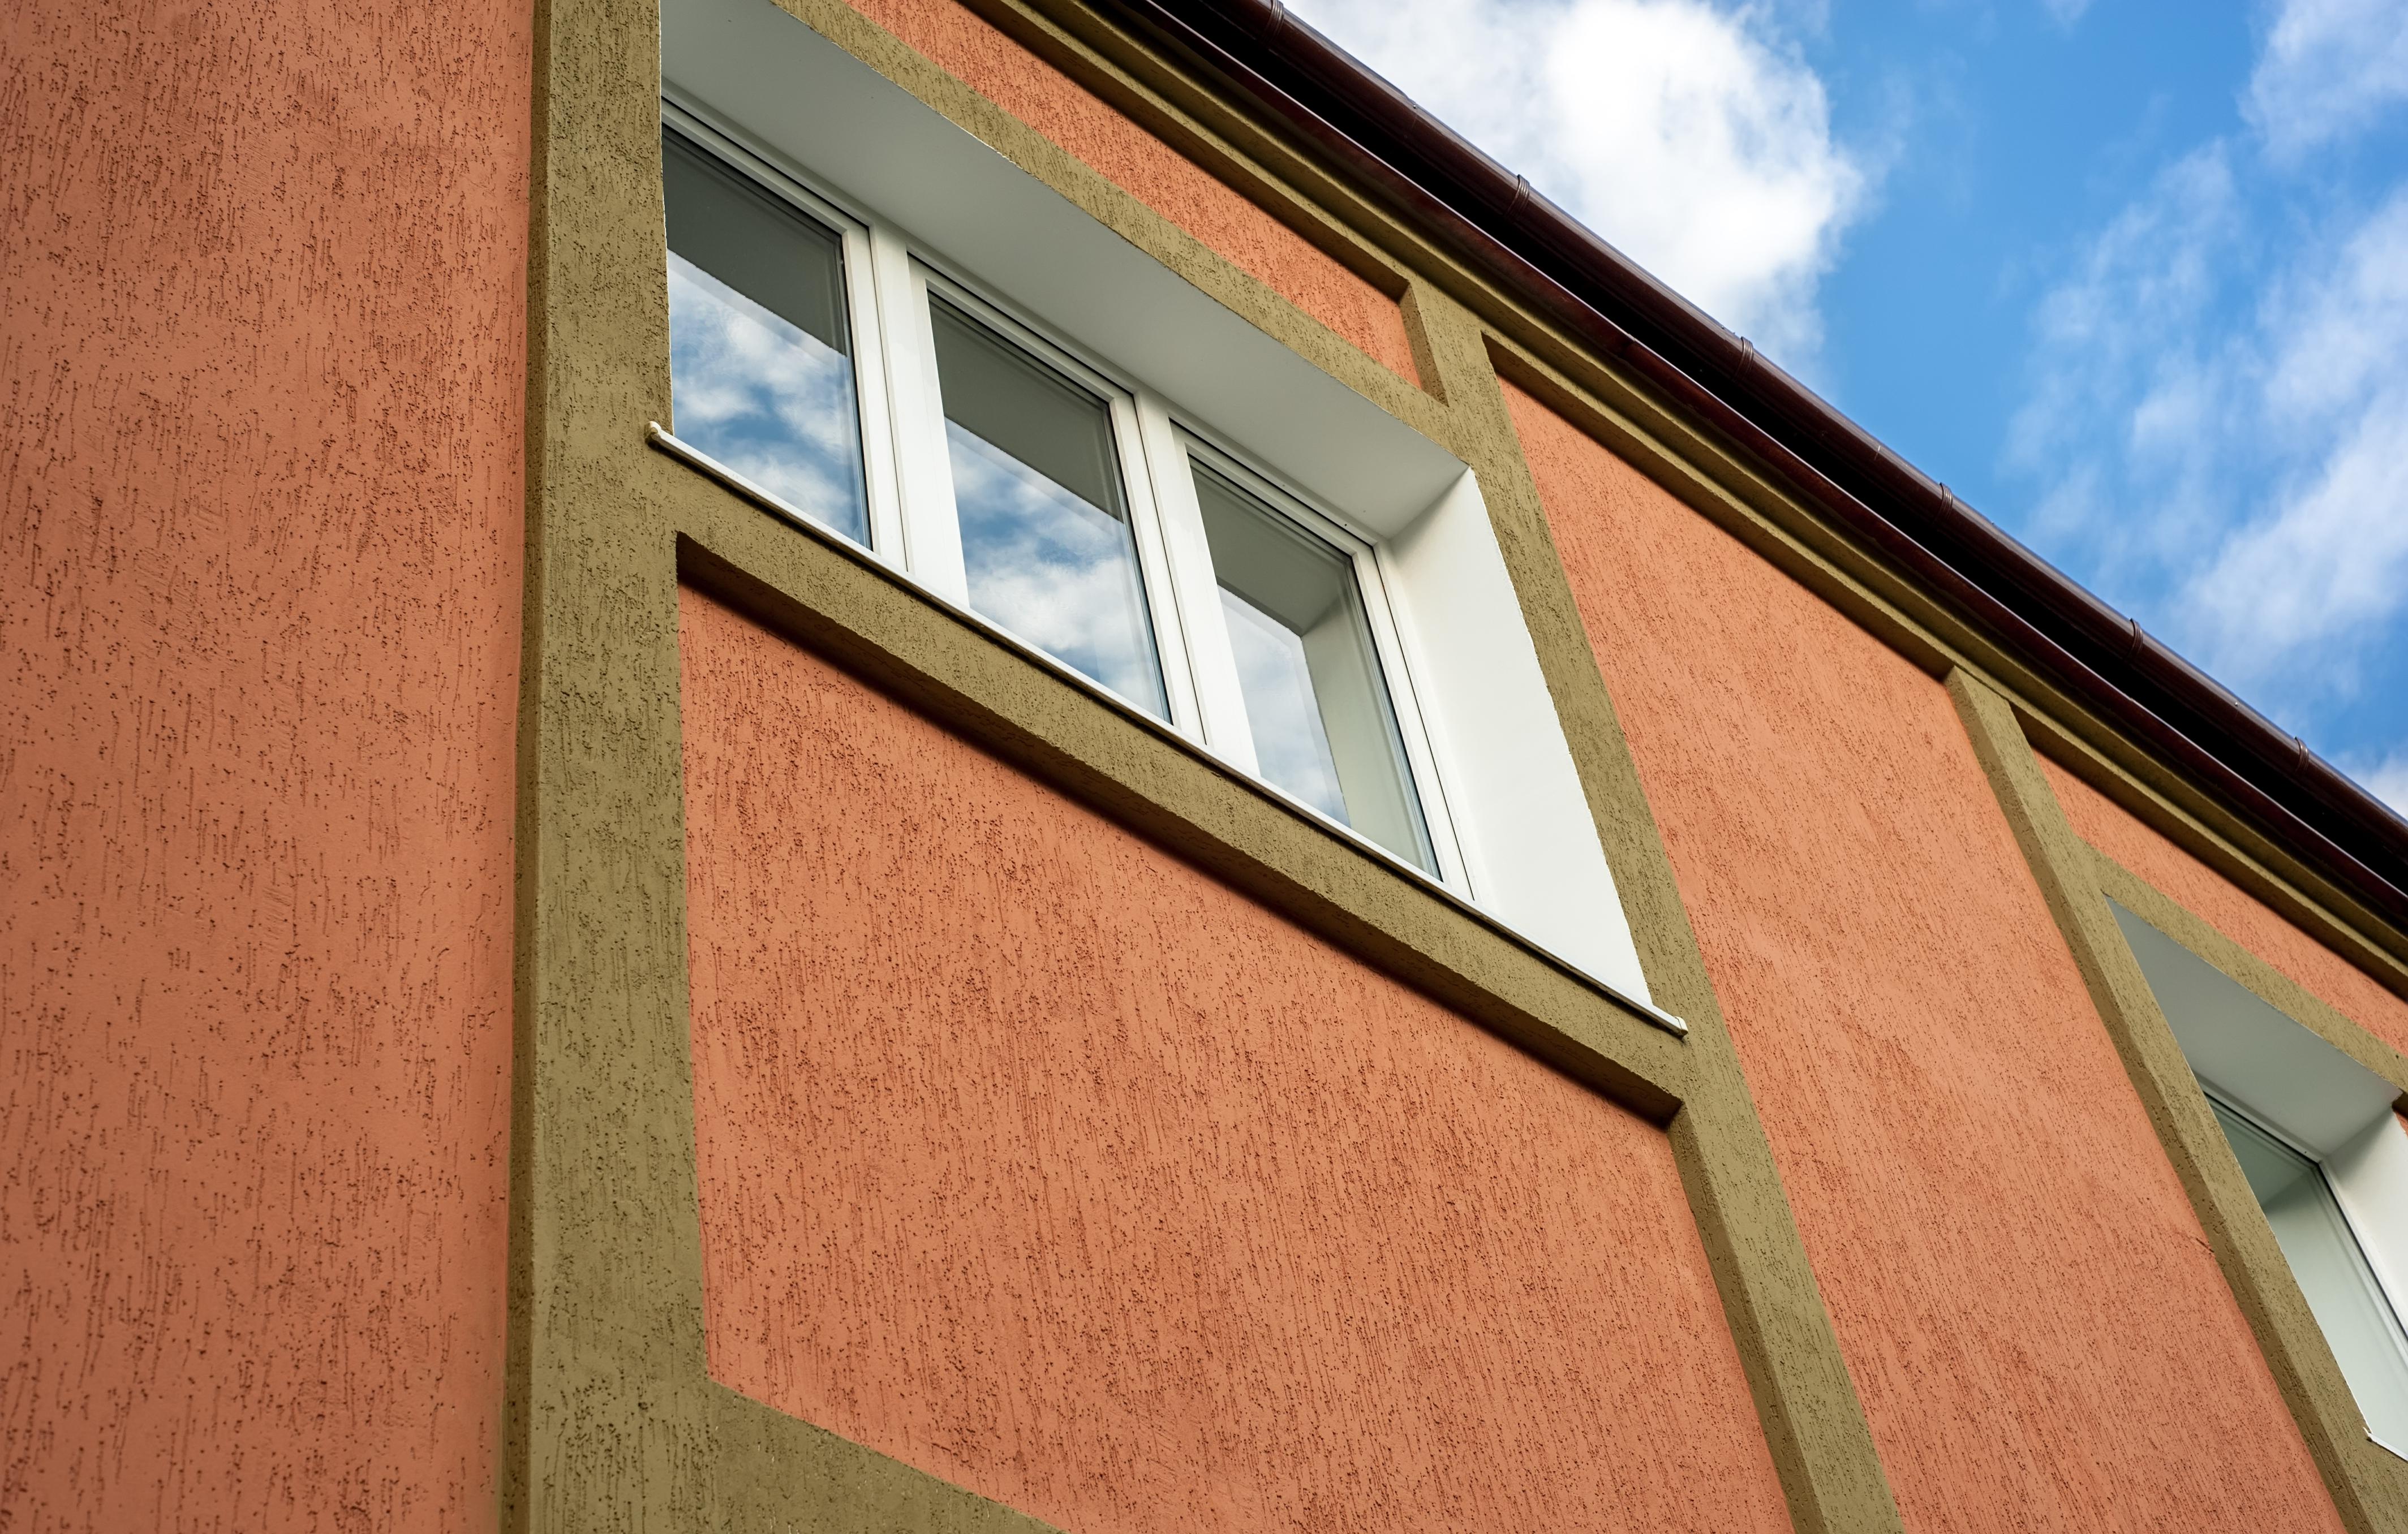 architectural details. window in a building with a brown stucco.